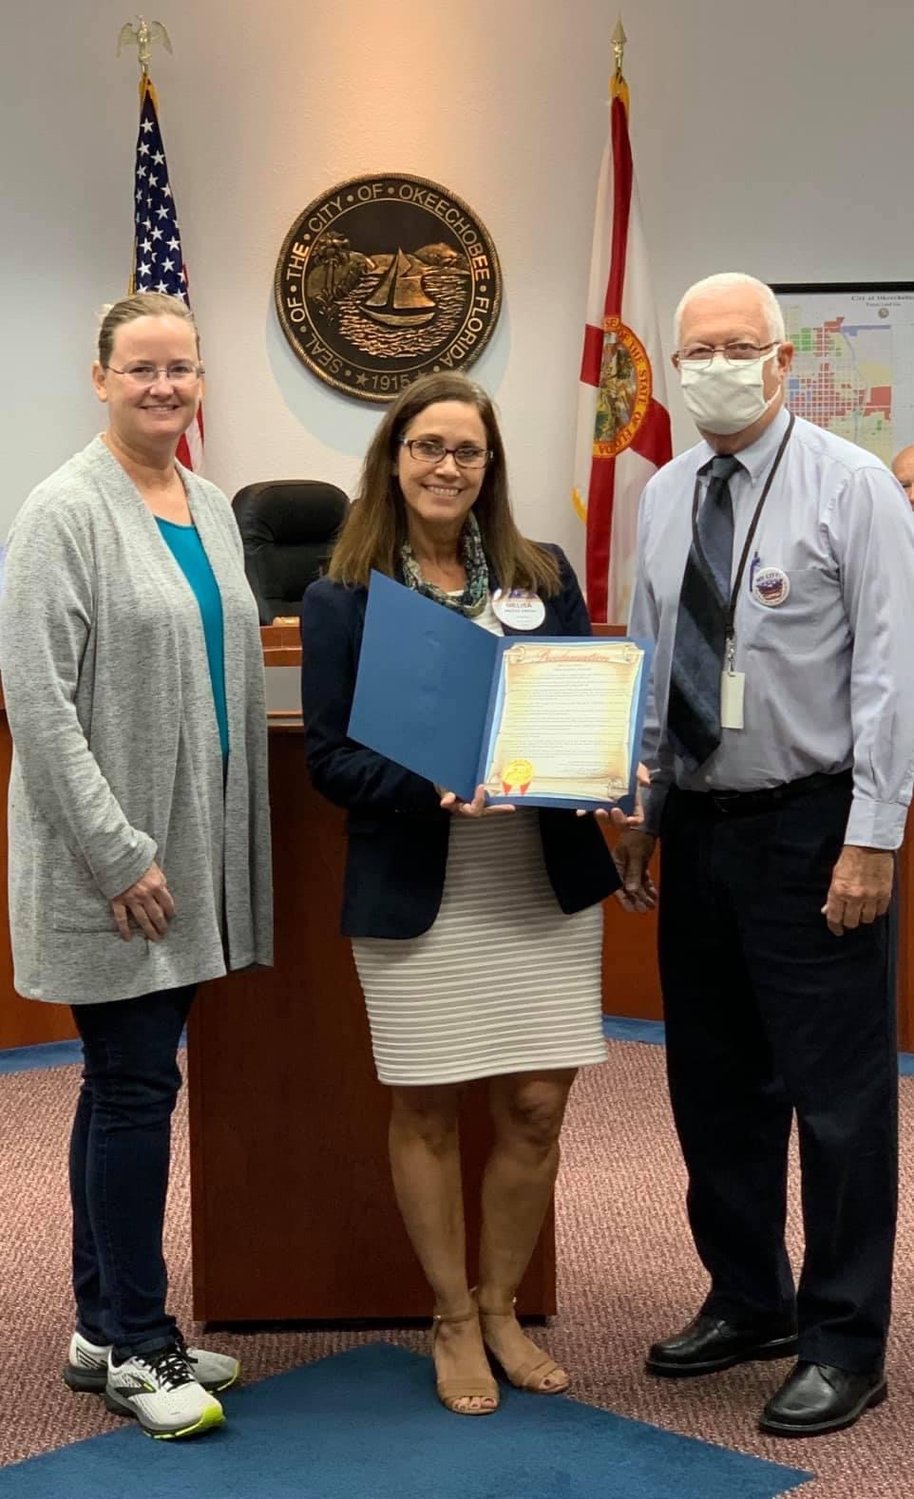 Mayor Dowling Watford presents a proclamation recognizing October 24, 2020 as World Polio Day at the Oct. 20, 2020 city council meeting. Recipients included Melisa Jahner, president Rotary Club of Okeechobee, and Denise Whitehead of Okeechobee County Parks and Recreation.